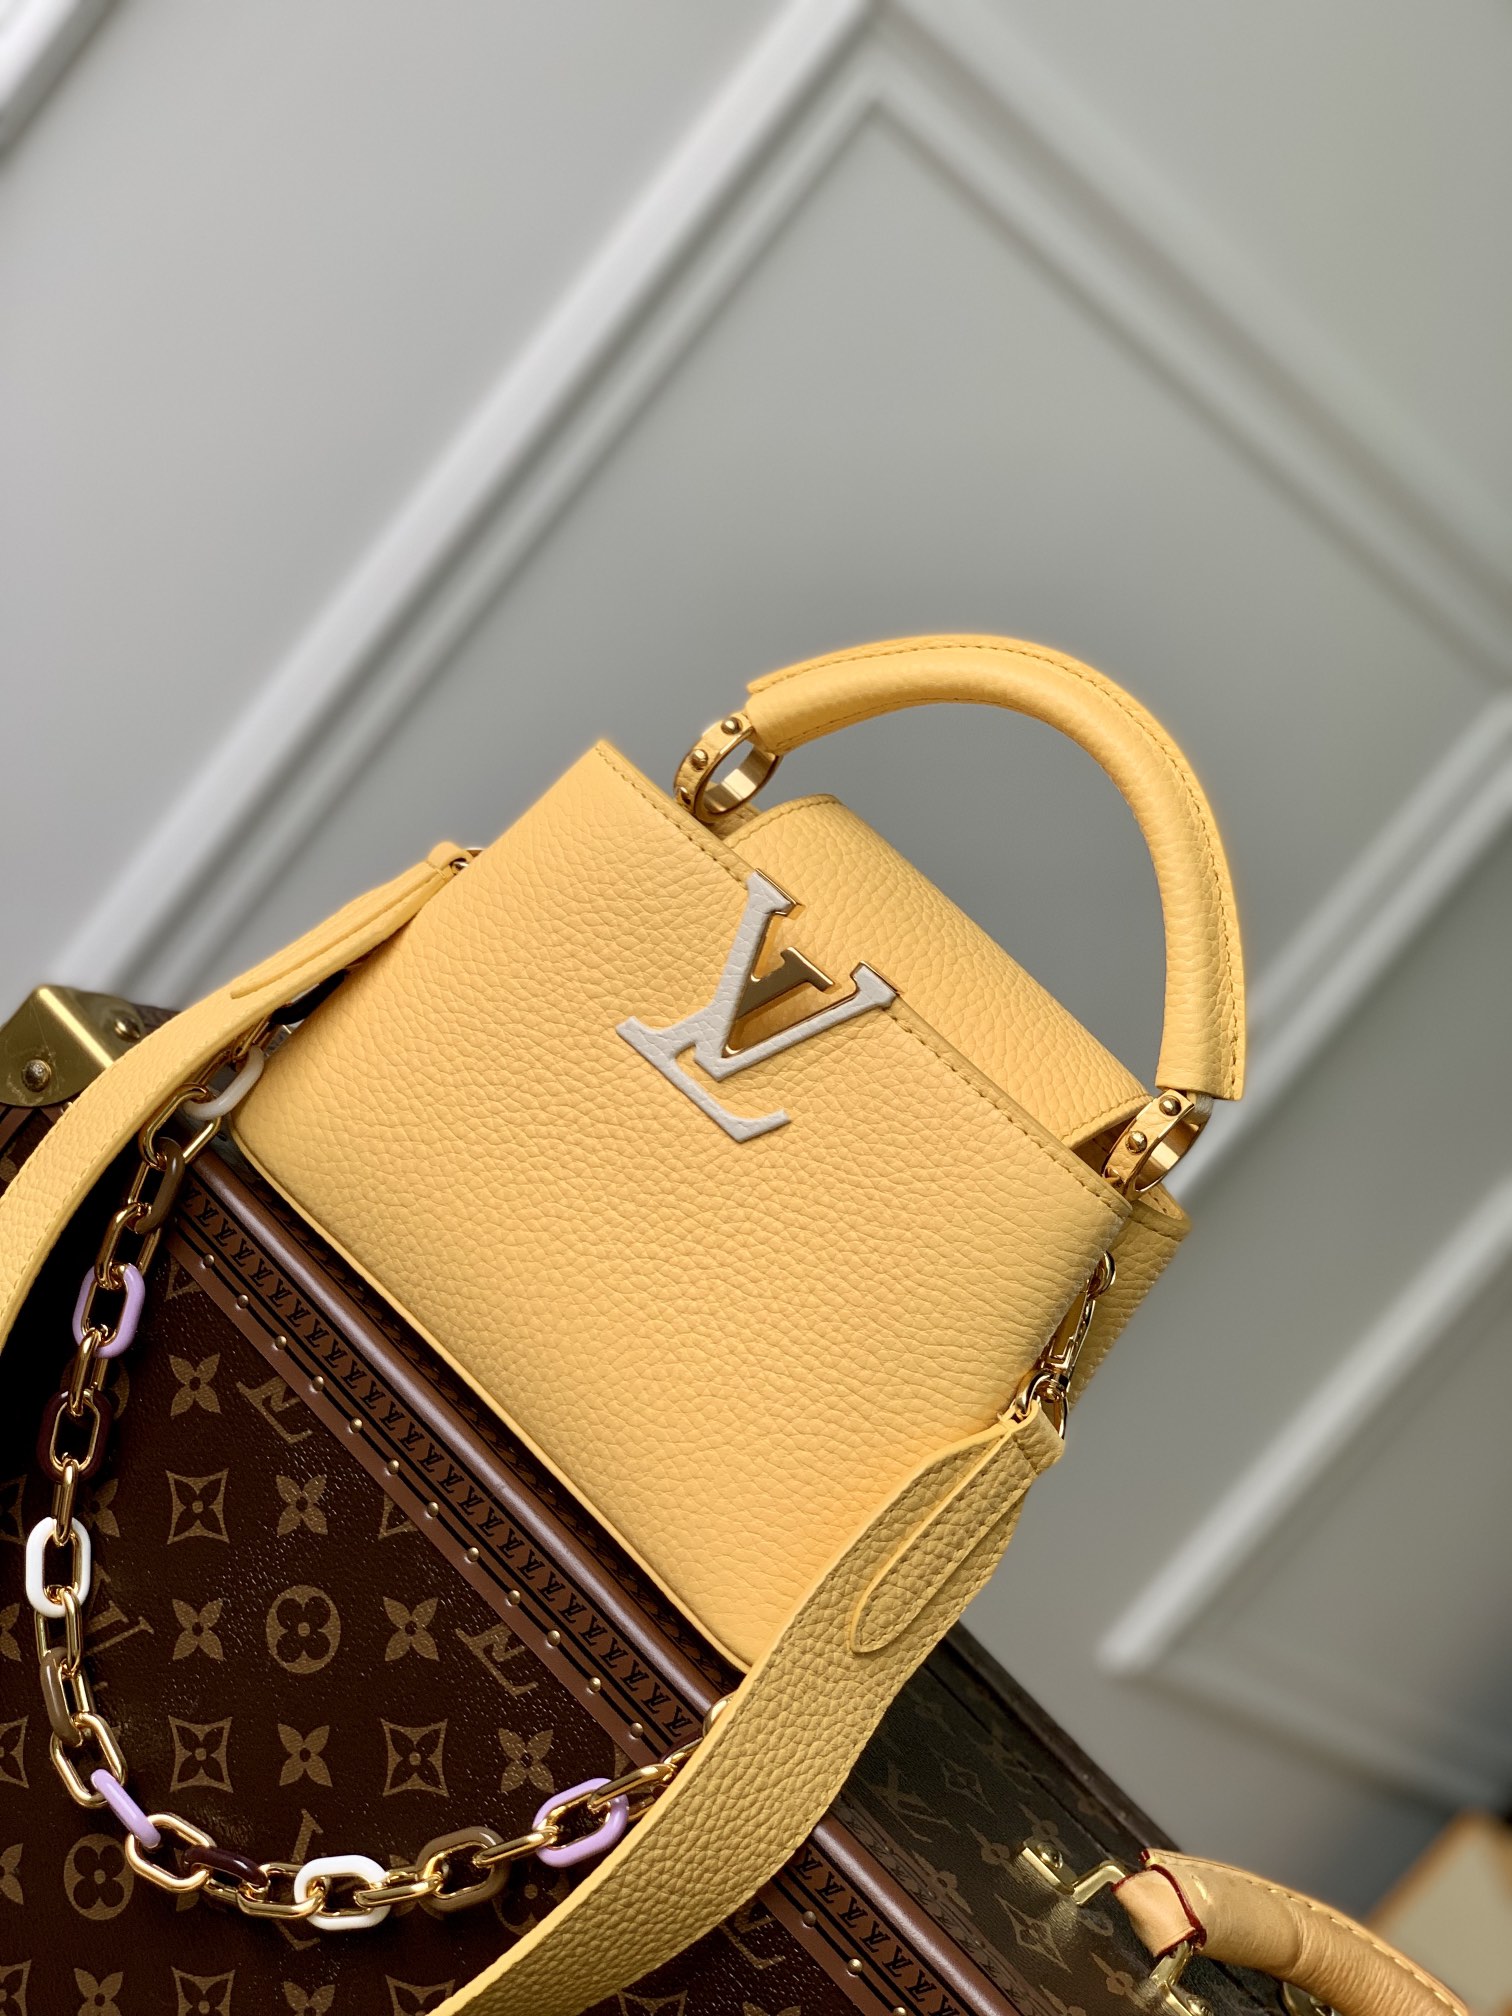 Louis Vuitton LV Capucines Bags Handbags Replica 1:1 High Quality
 Yellow Gold Hardware Taurillon Resin Chains M21798